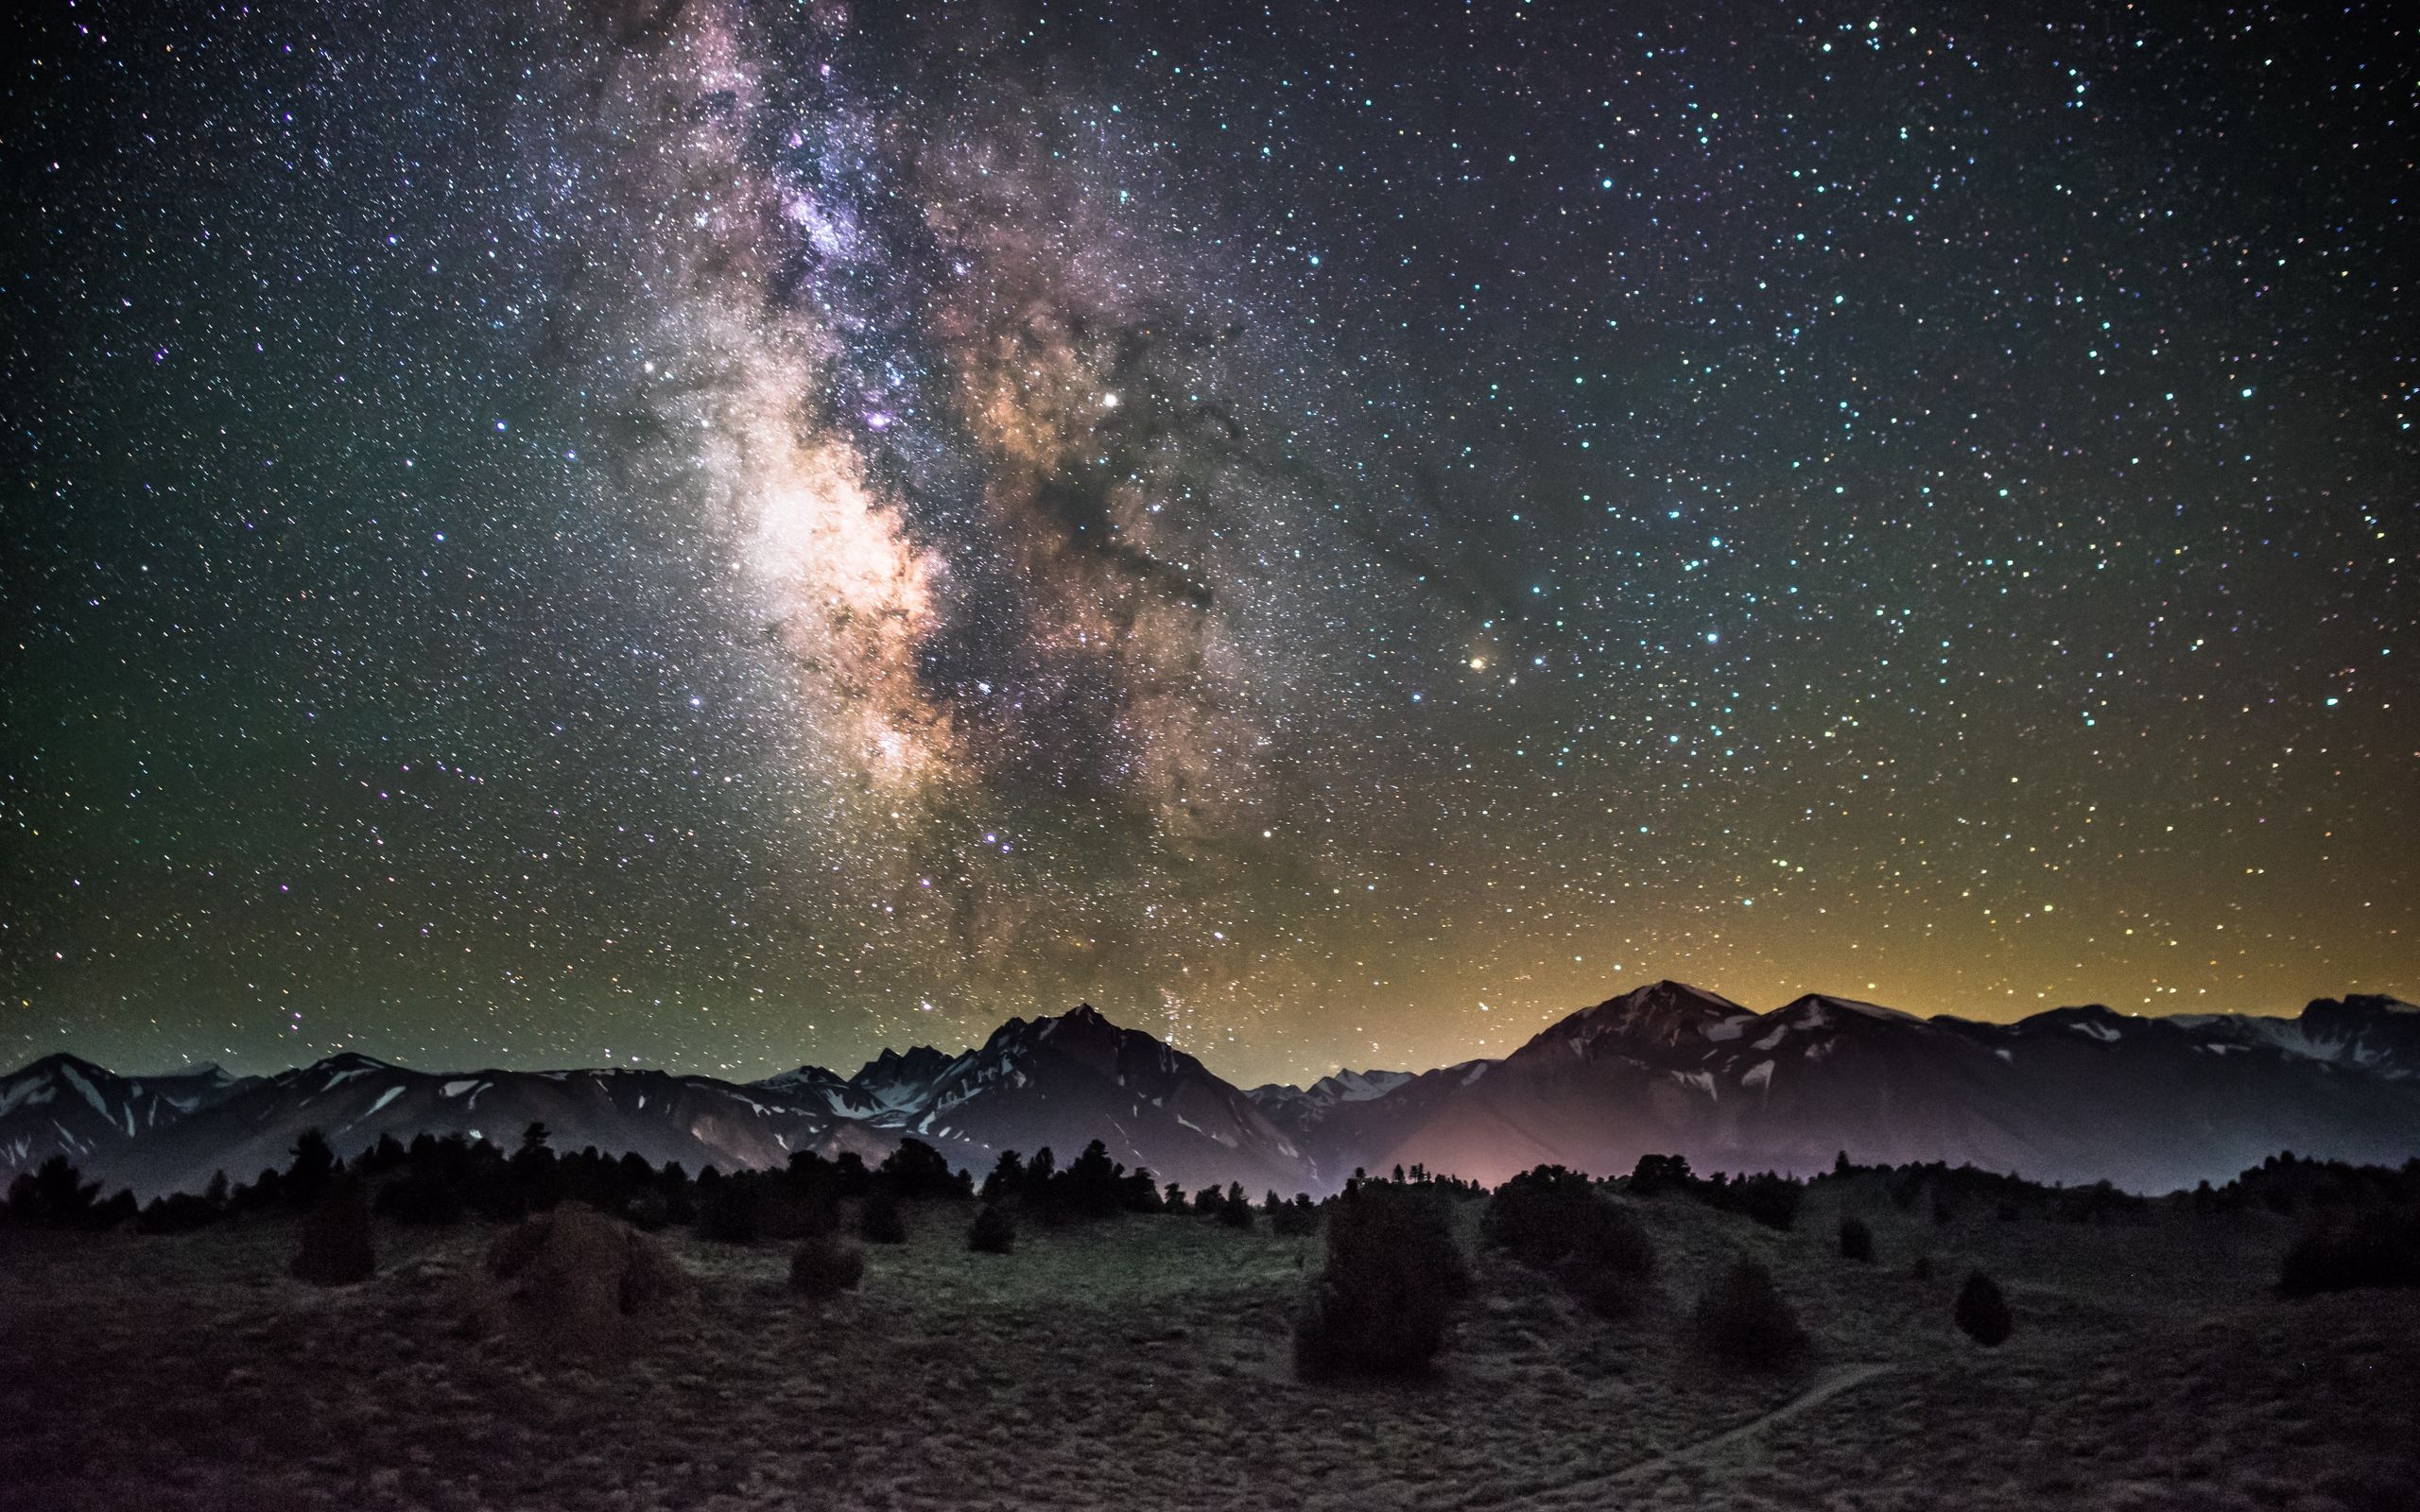 Download wallpaper 2560x1600 galaxy, night, starry sky, mountains